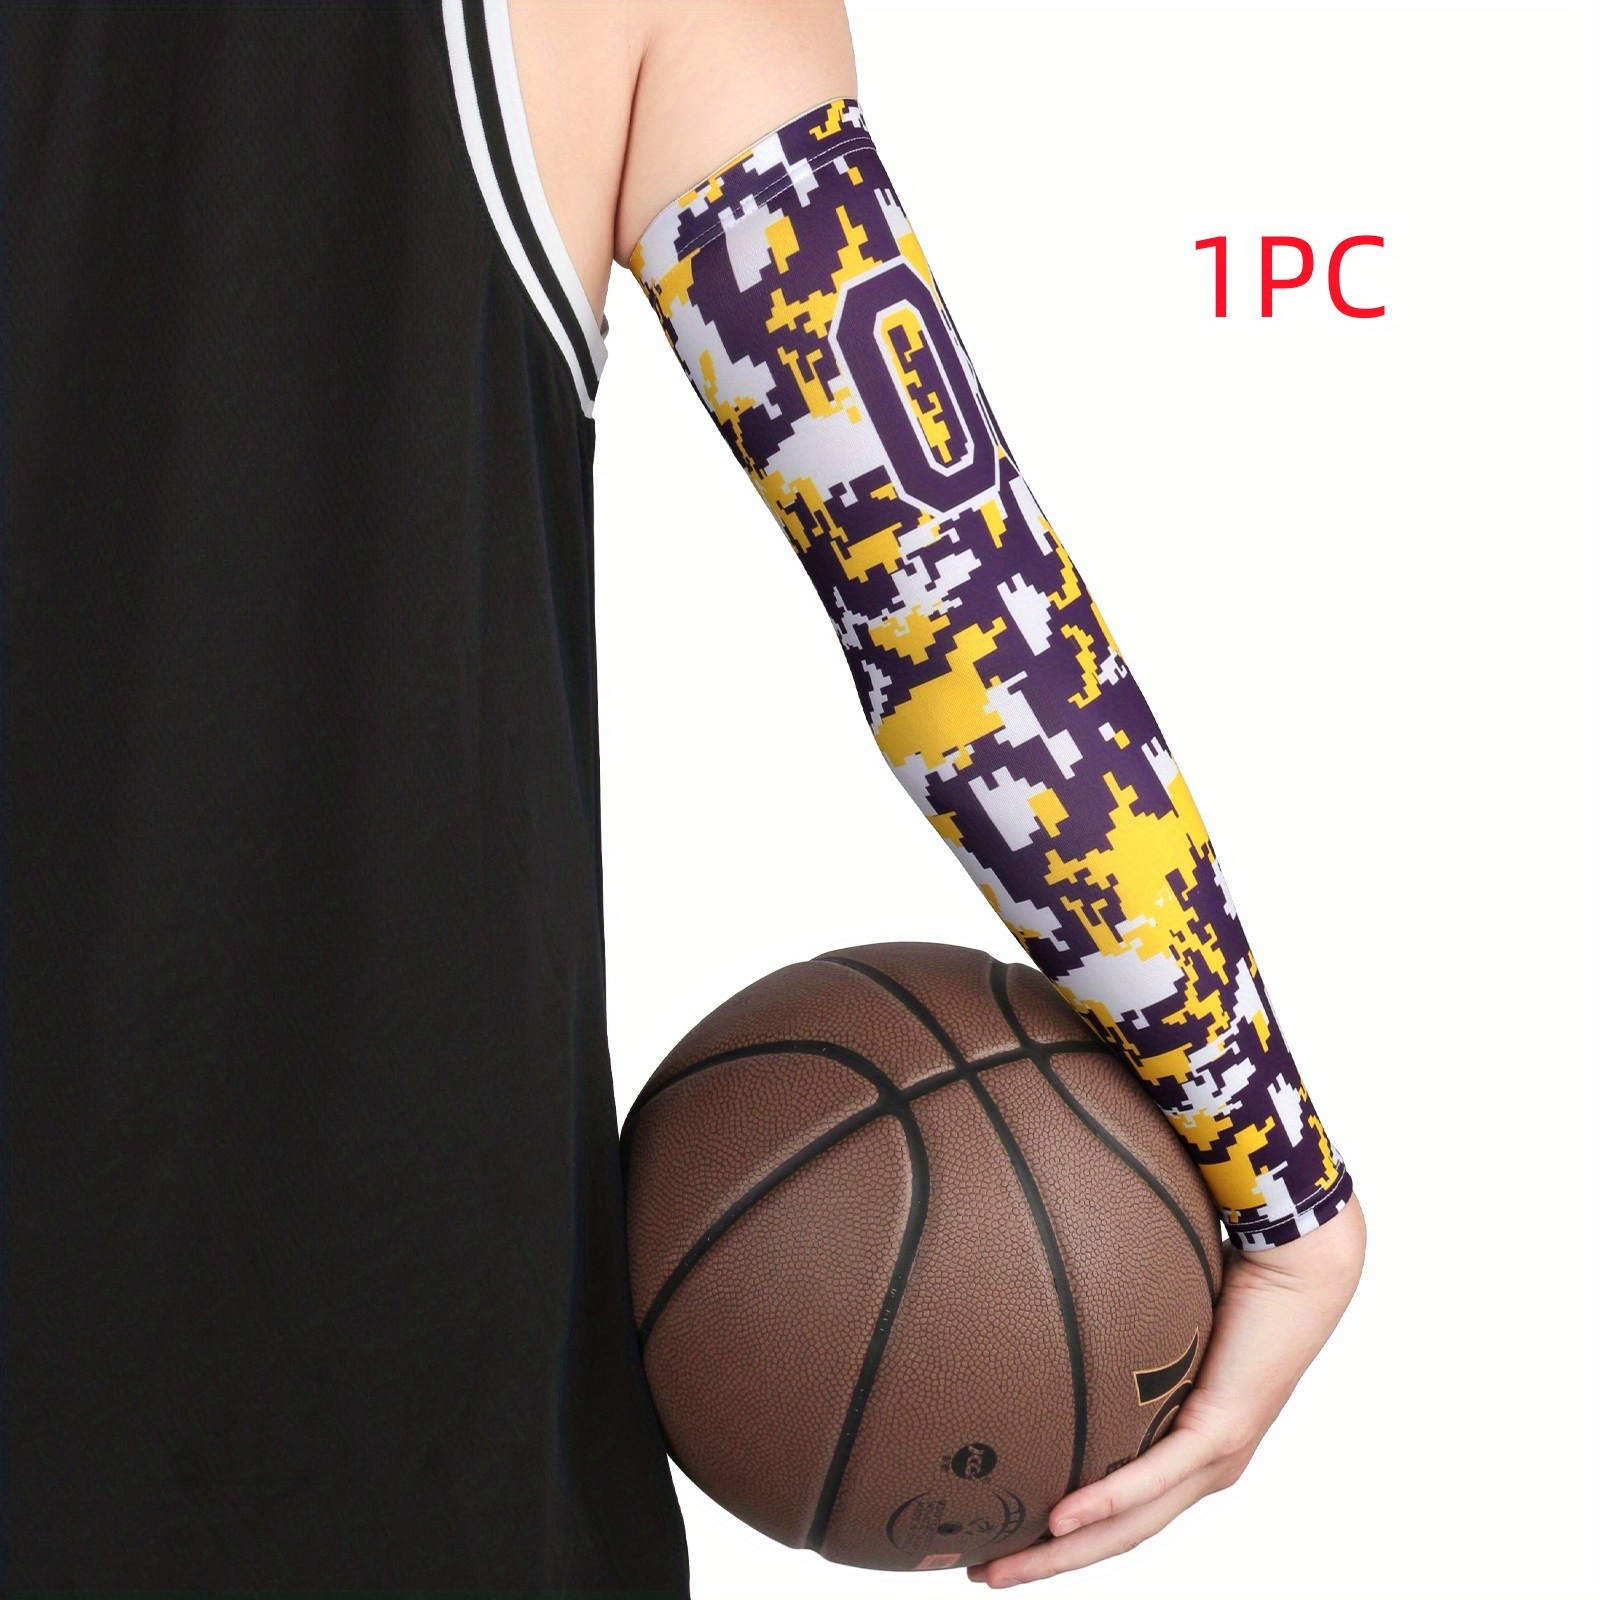 1pc High Performance Sports Compression Arm Sleeves Youth Adult